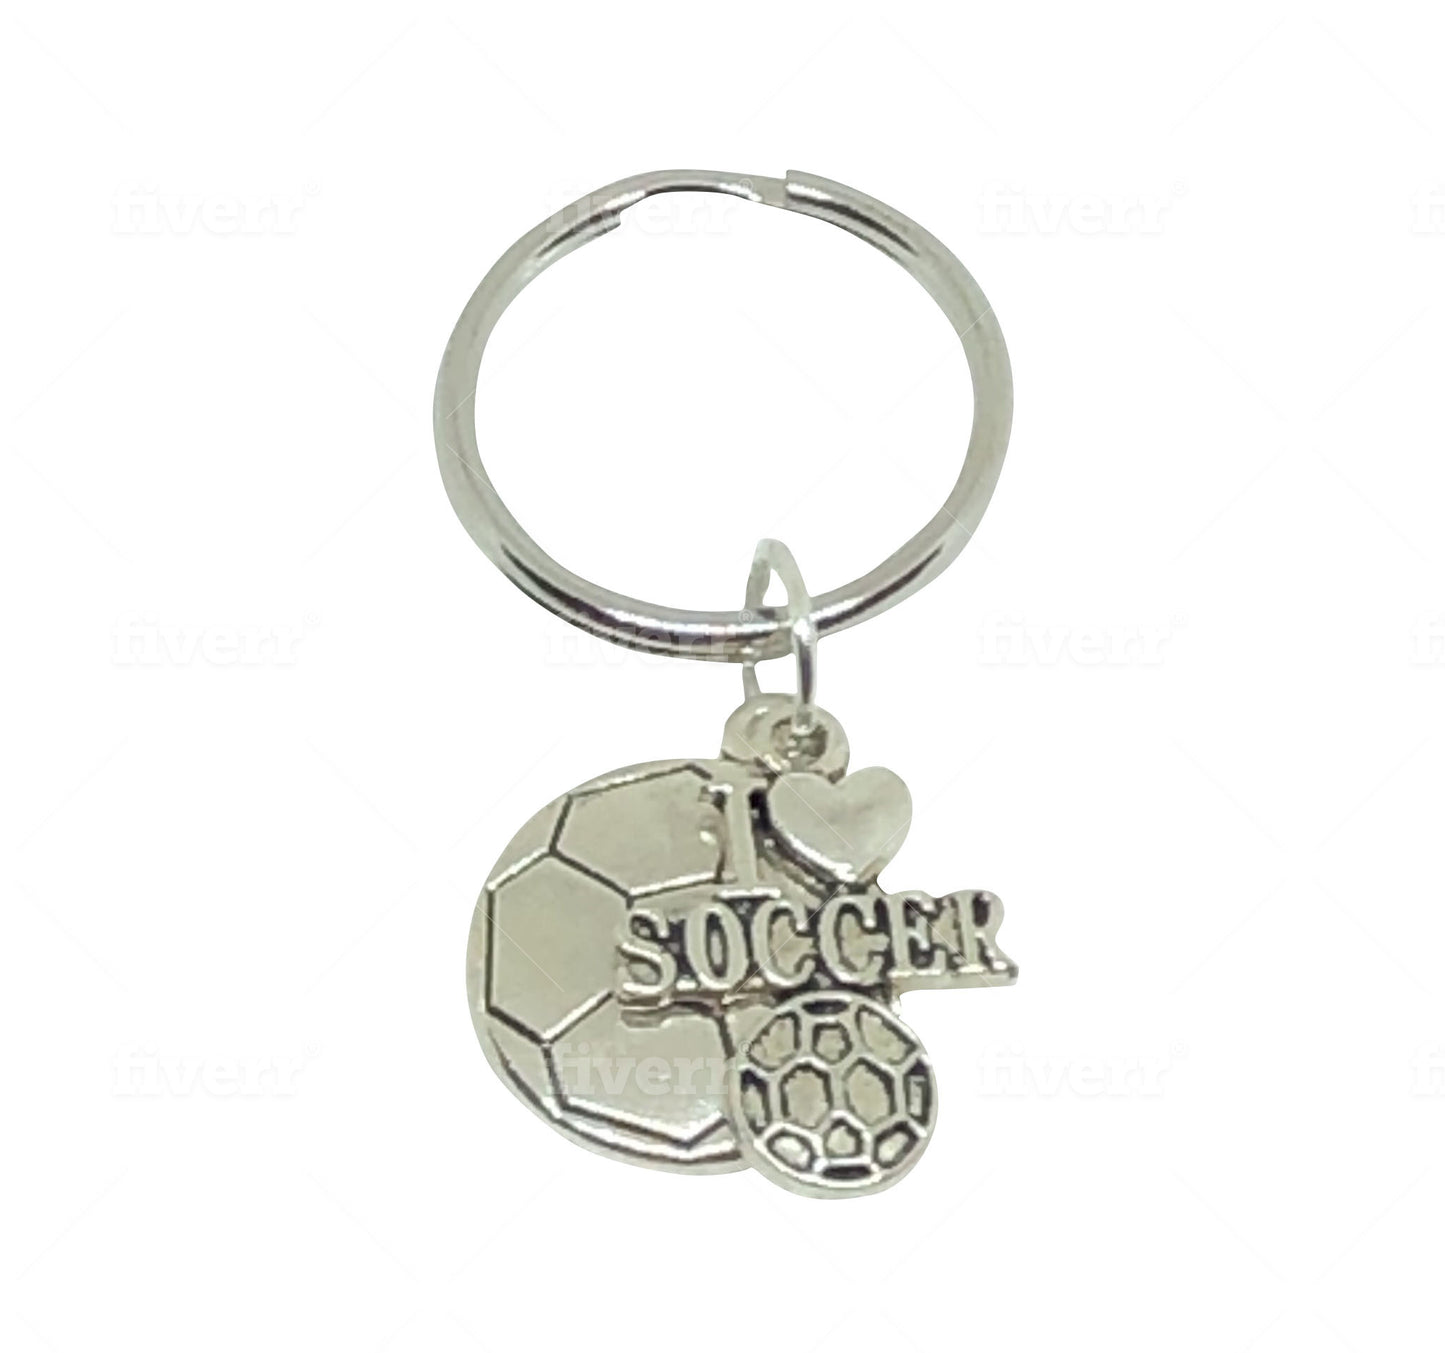 Soccer Keychain - Soccer Accessories - Cheer and Dance On Demand